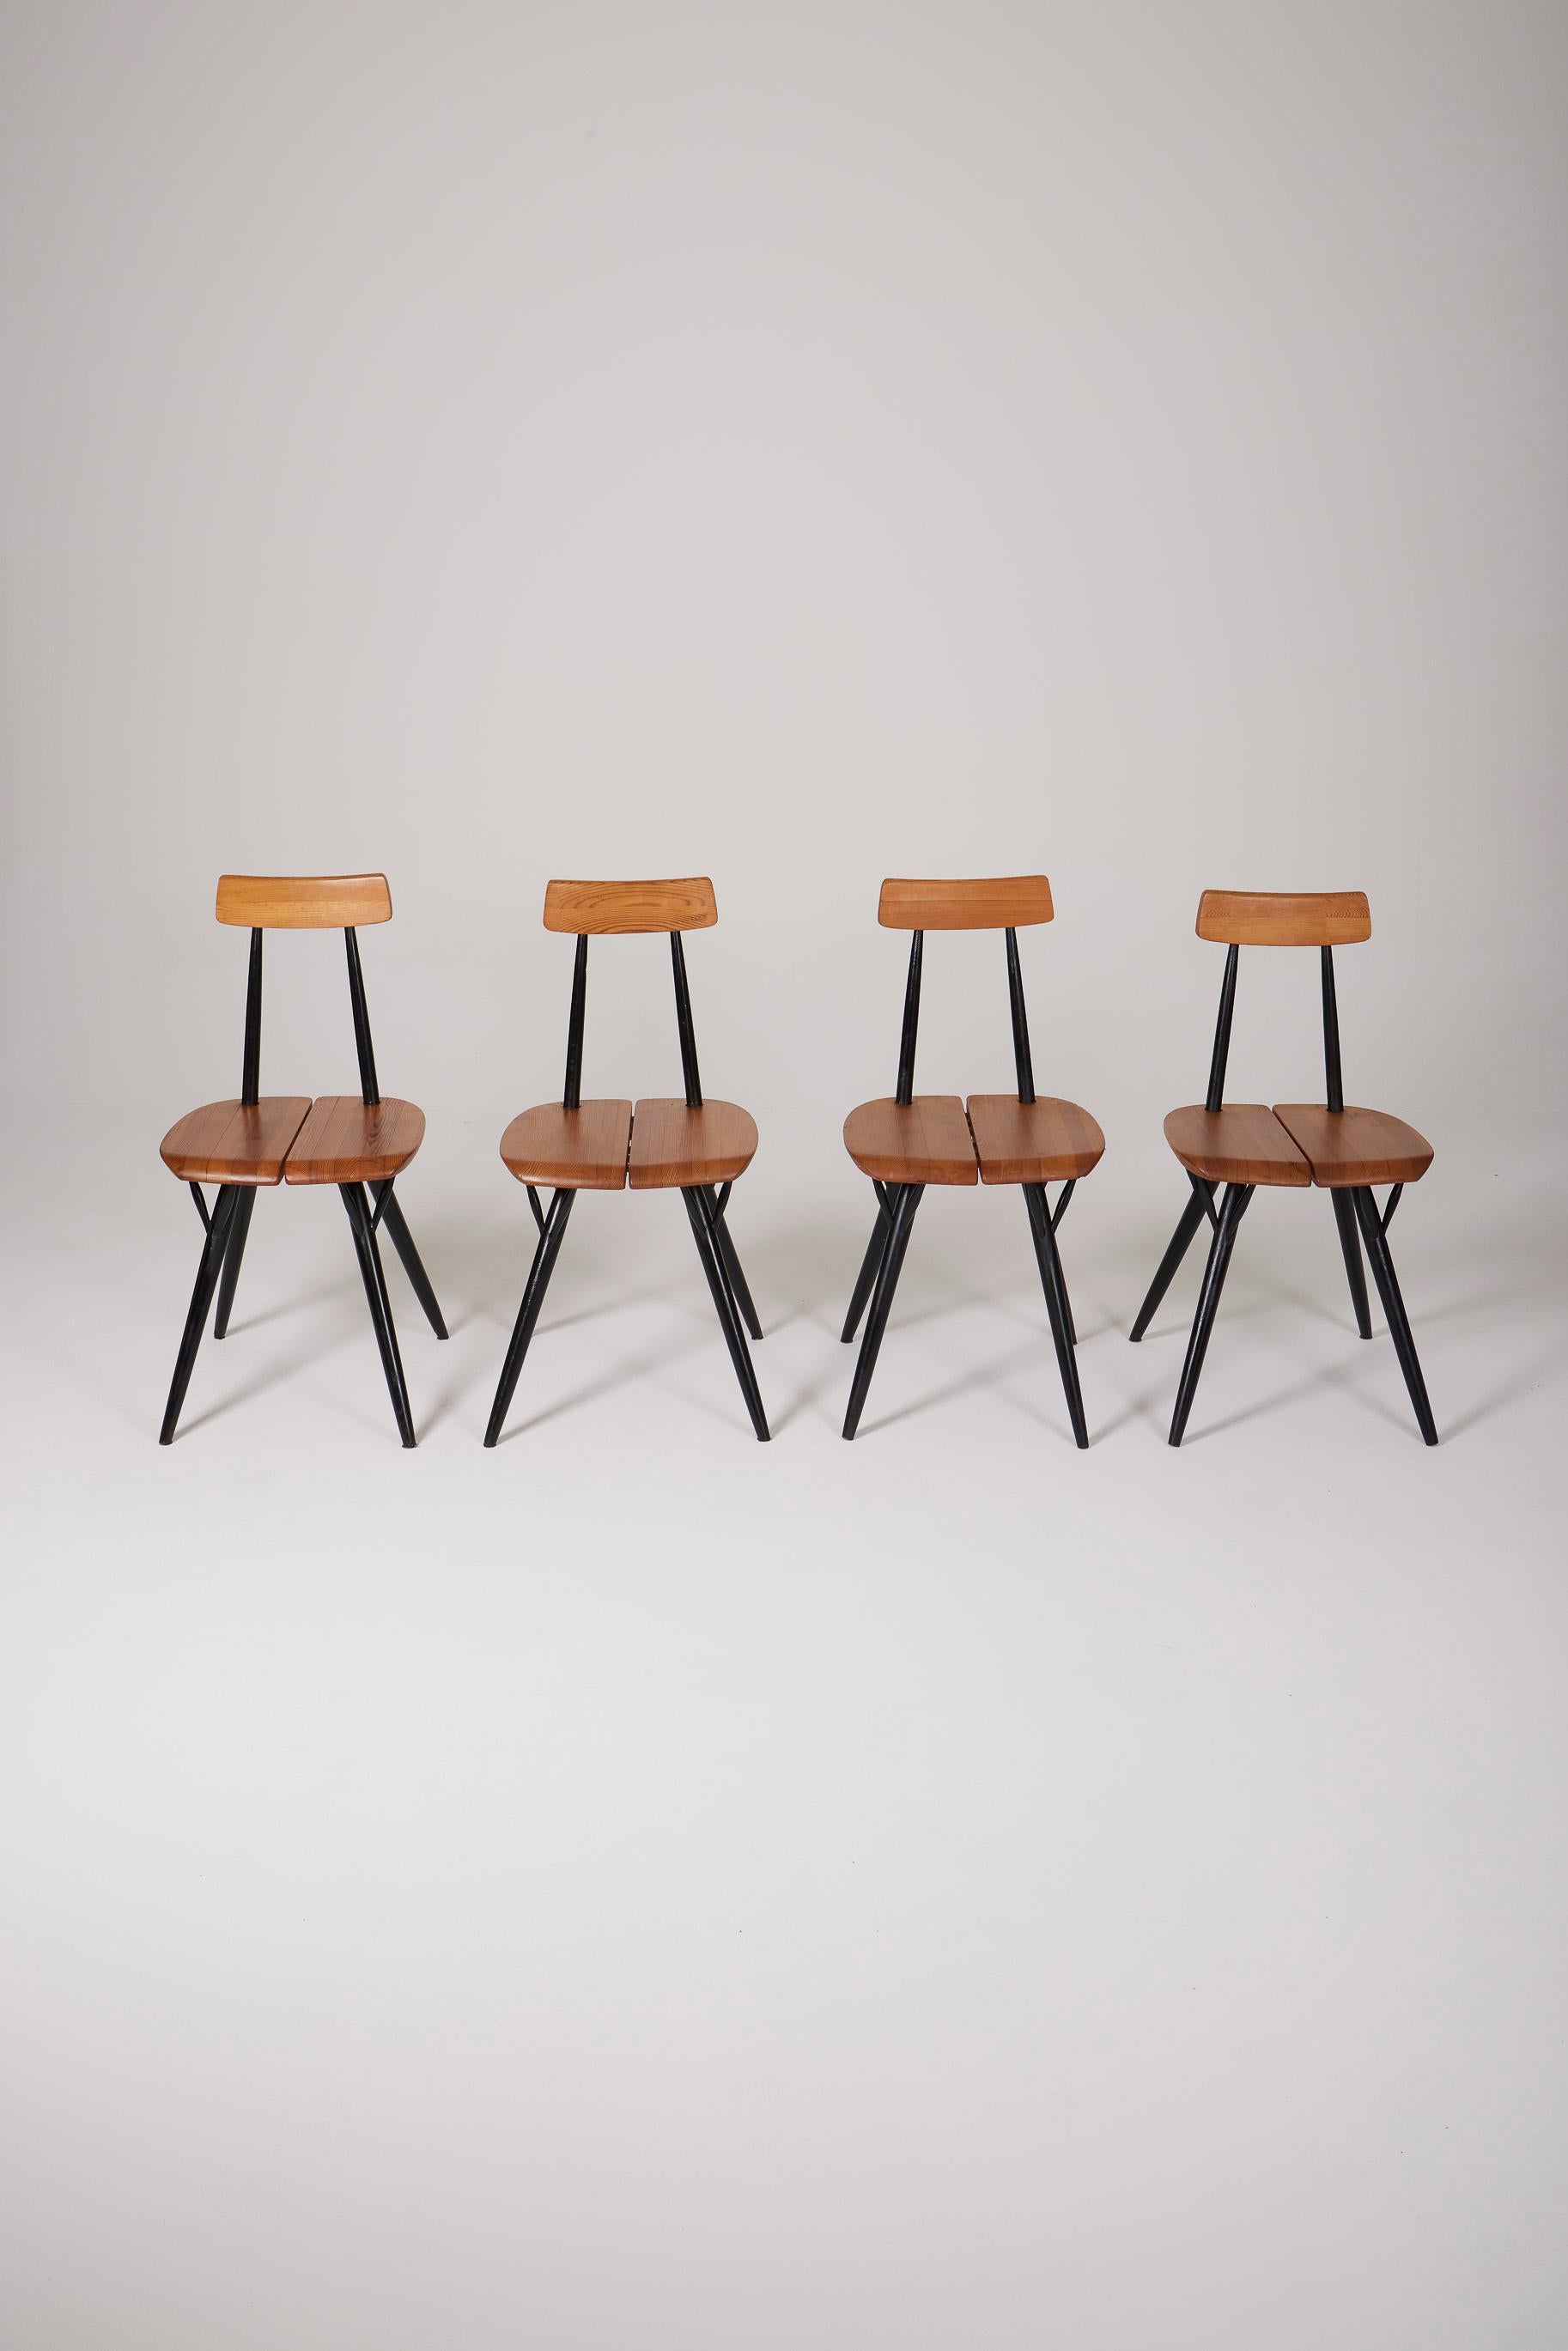 Set of 4 Pirkka chairs in pine wood by Finnish designer Ilmari Tapiovaara for Laukaan Puu, dating back to the 1950s. In perfect condition.
DV529-530-531-532
